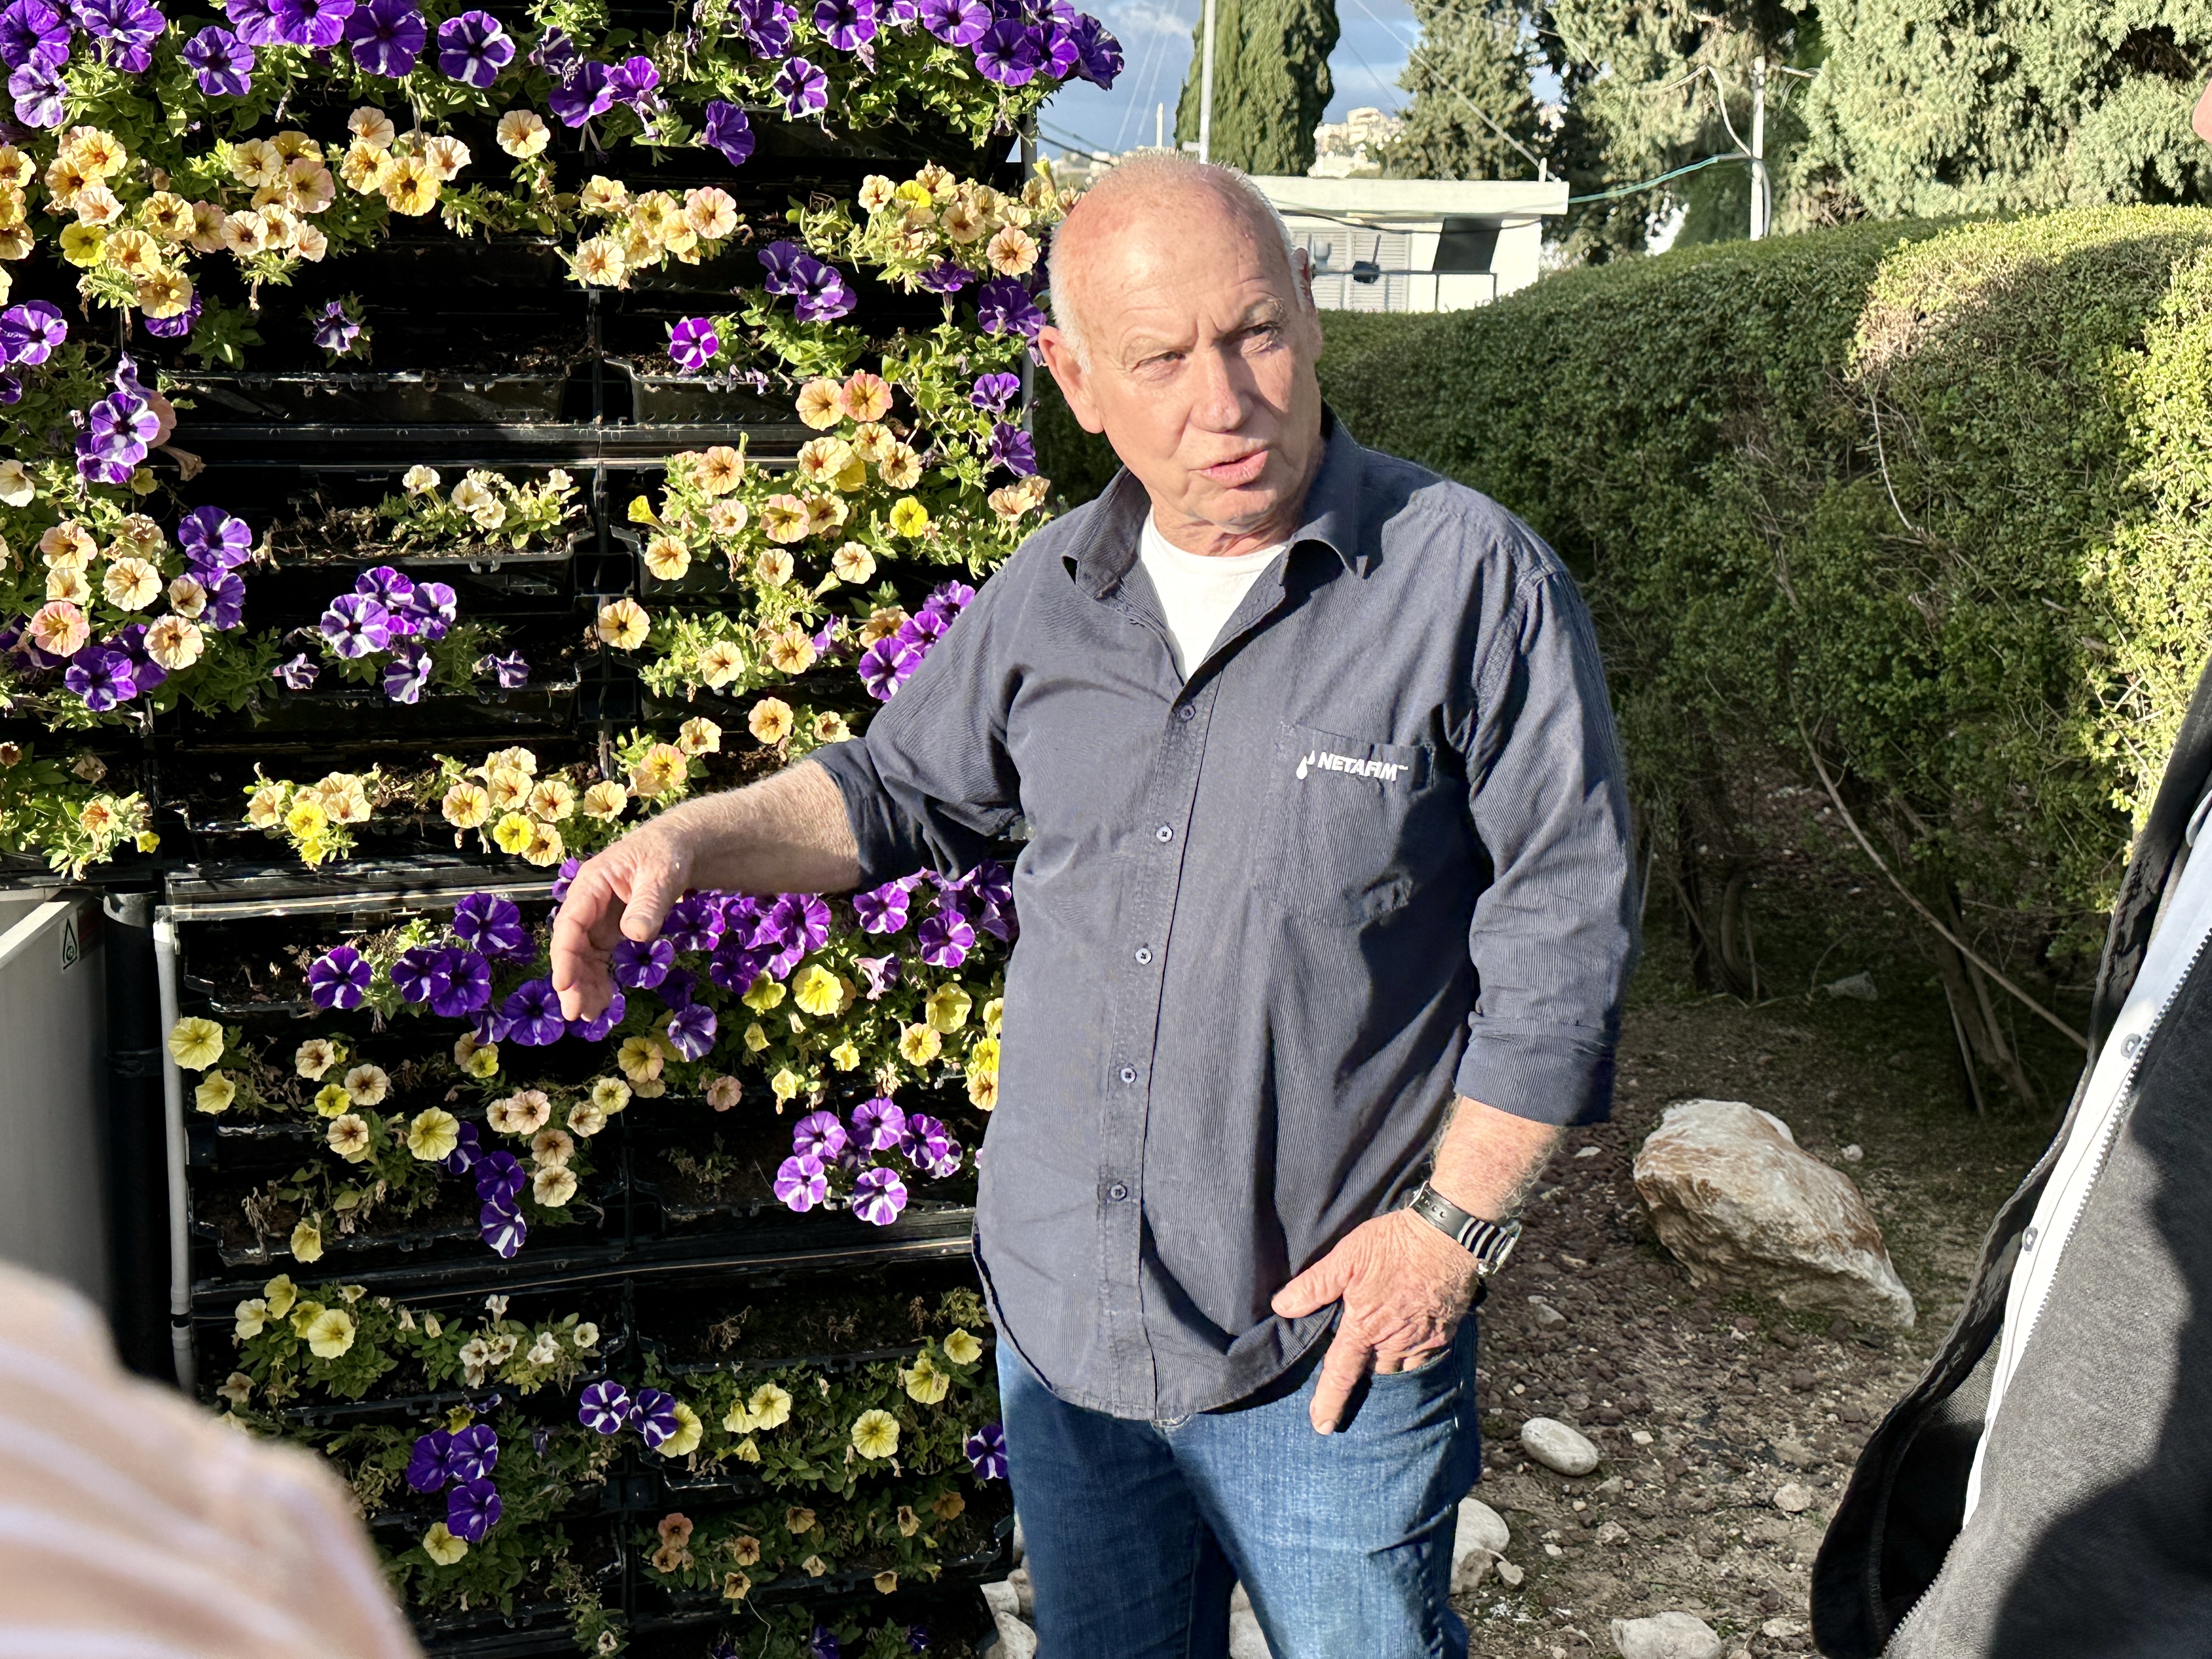 OALP Members Get First Hand View of Cutting Edge Drip Irrigation Technology as Israel Travel Ends